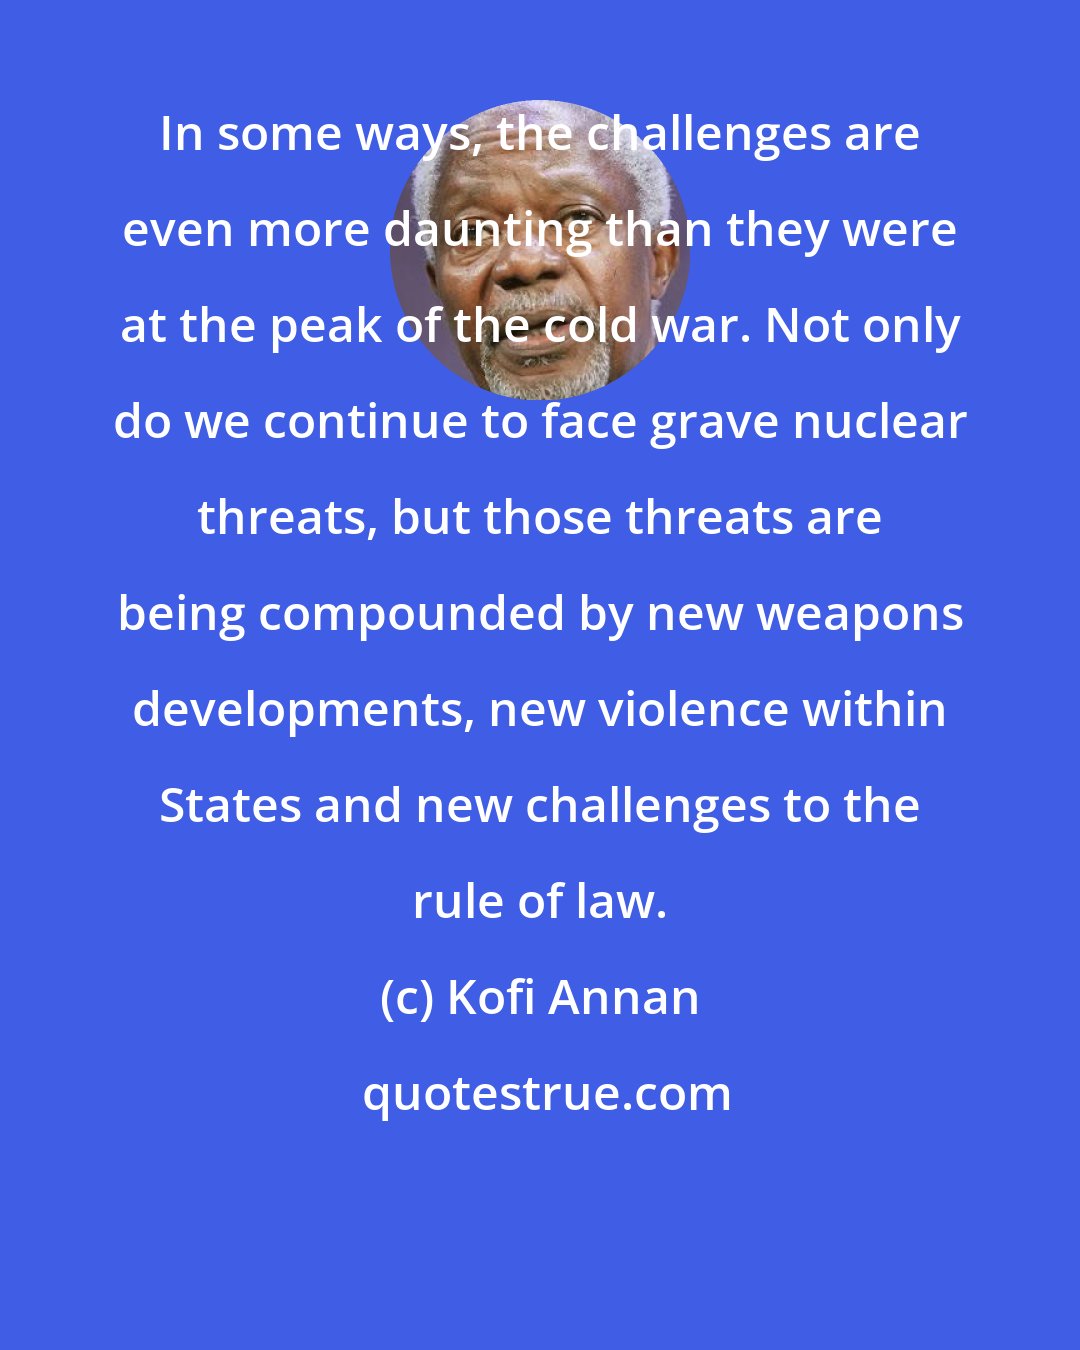 Kofi Annan: In some ways, the challenges are even more daunting than they were at the peak of the cold war. Not only do we continue to face grave nuclear threats, but those threats are being compounded by new weapons developments, new violence within States and new challenges to the rule of law.